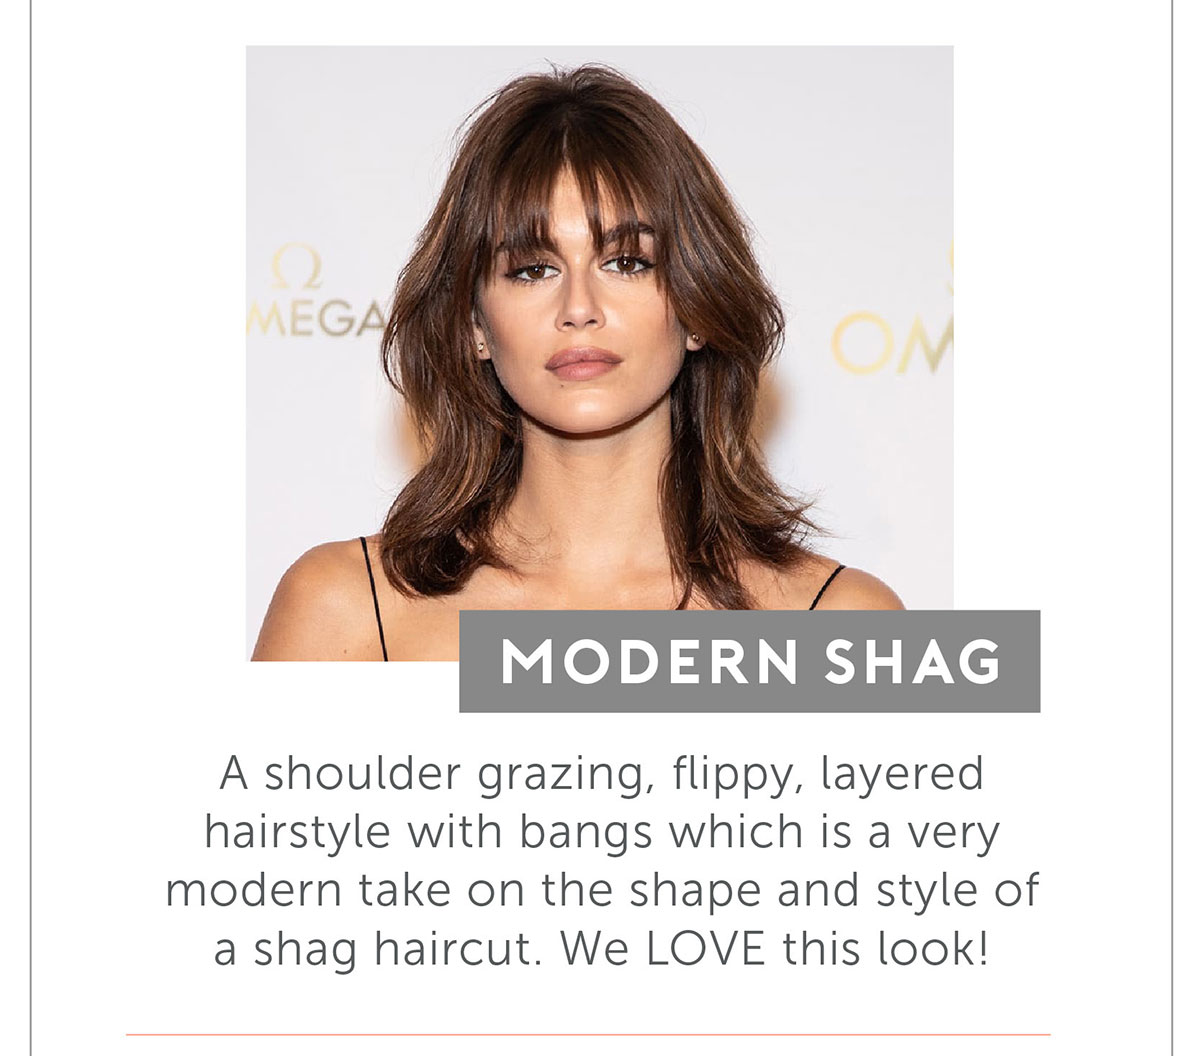 Modern Shag. A shoulder grazing, flippy, layered hairstyle with bangs which is a very modern take on the shape and style of a shag haircut. We LOVE this look!